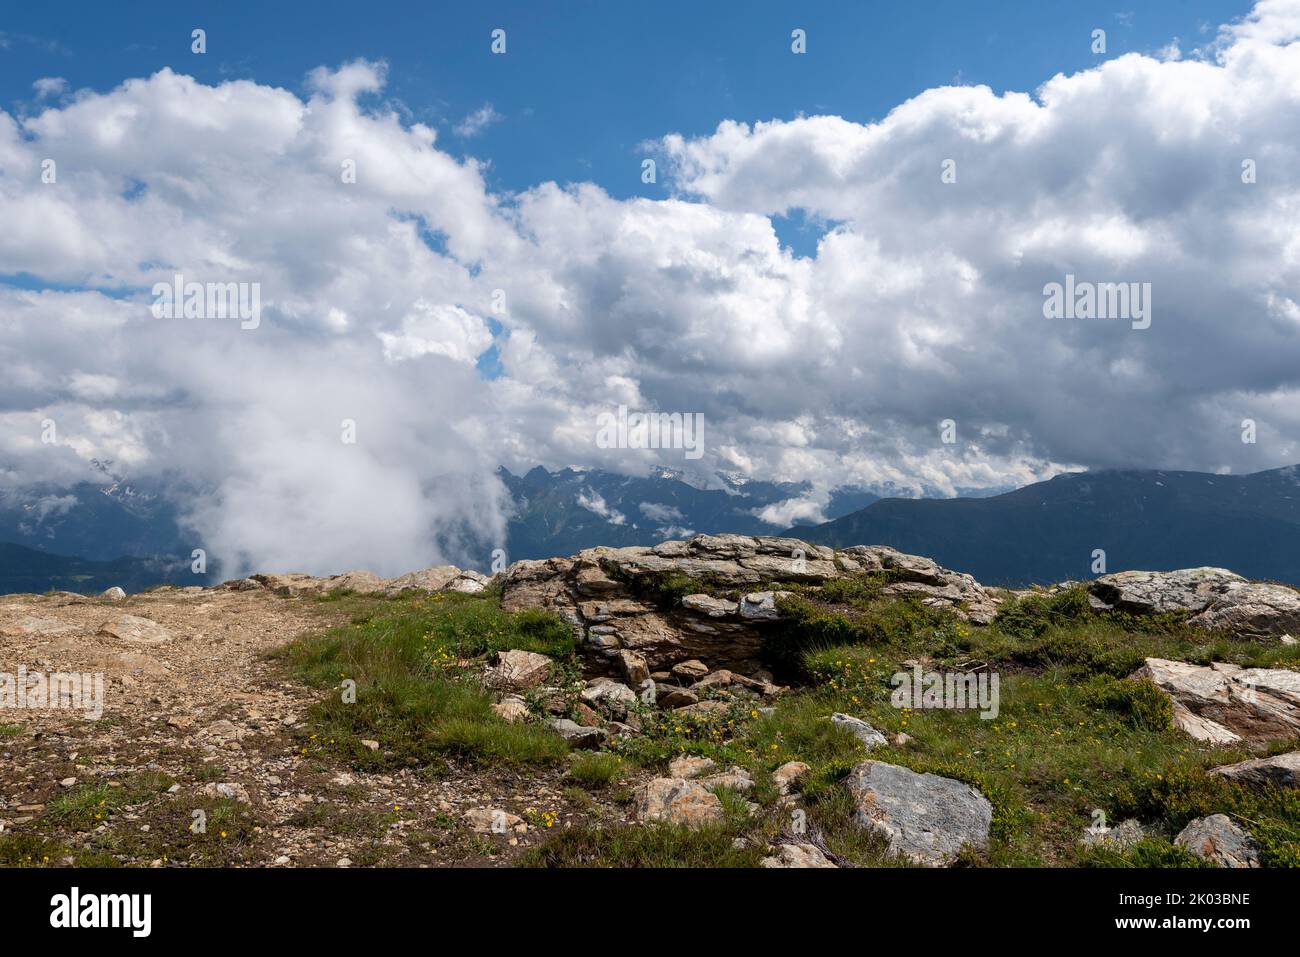 White clouds move over the Alps, European long-distance hiking trail E5, crossing the Alps, Zams, Tyrol, Austria Stock Photo